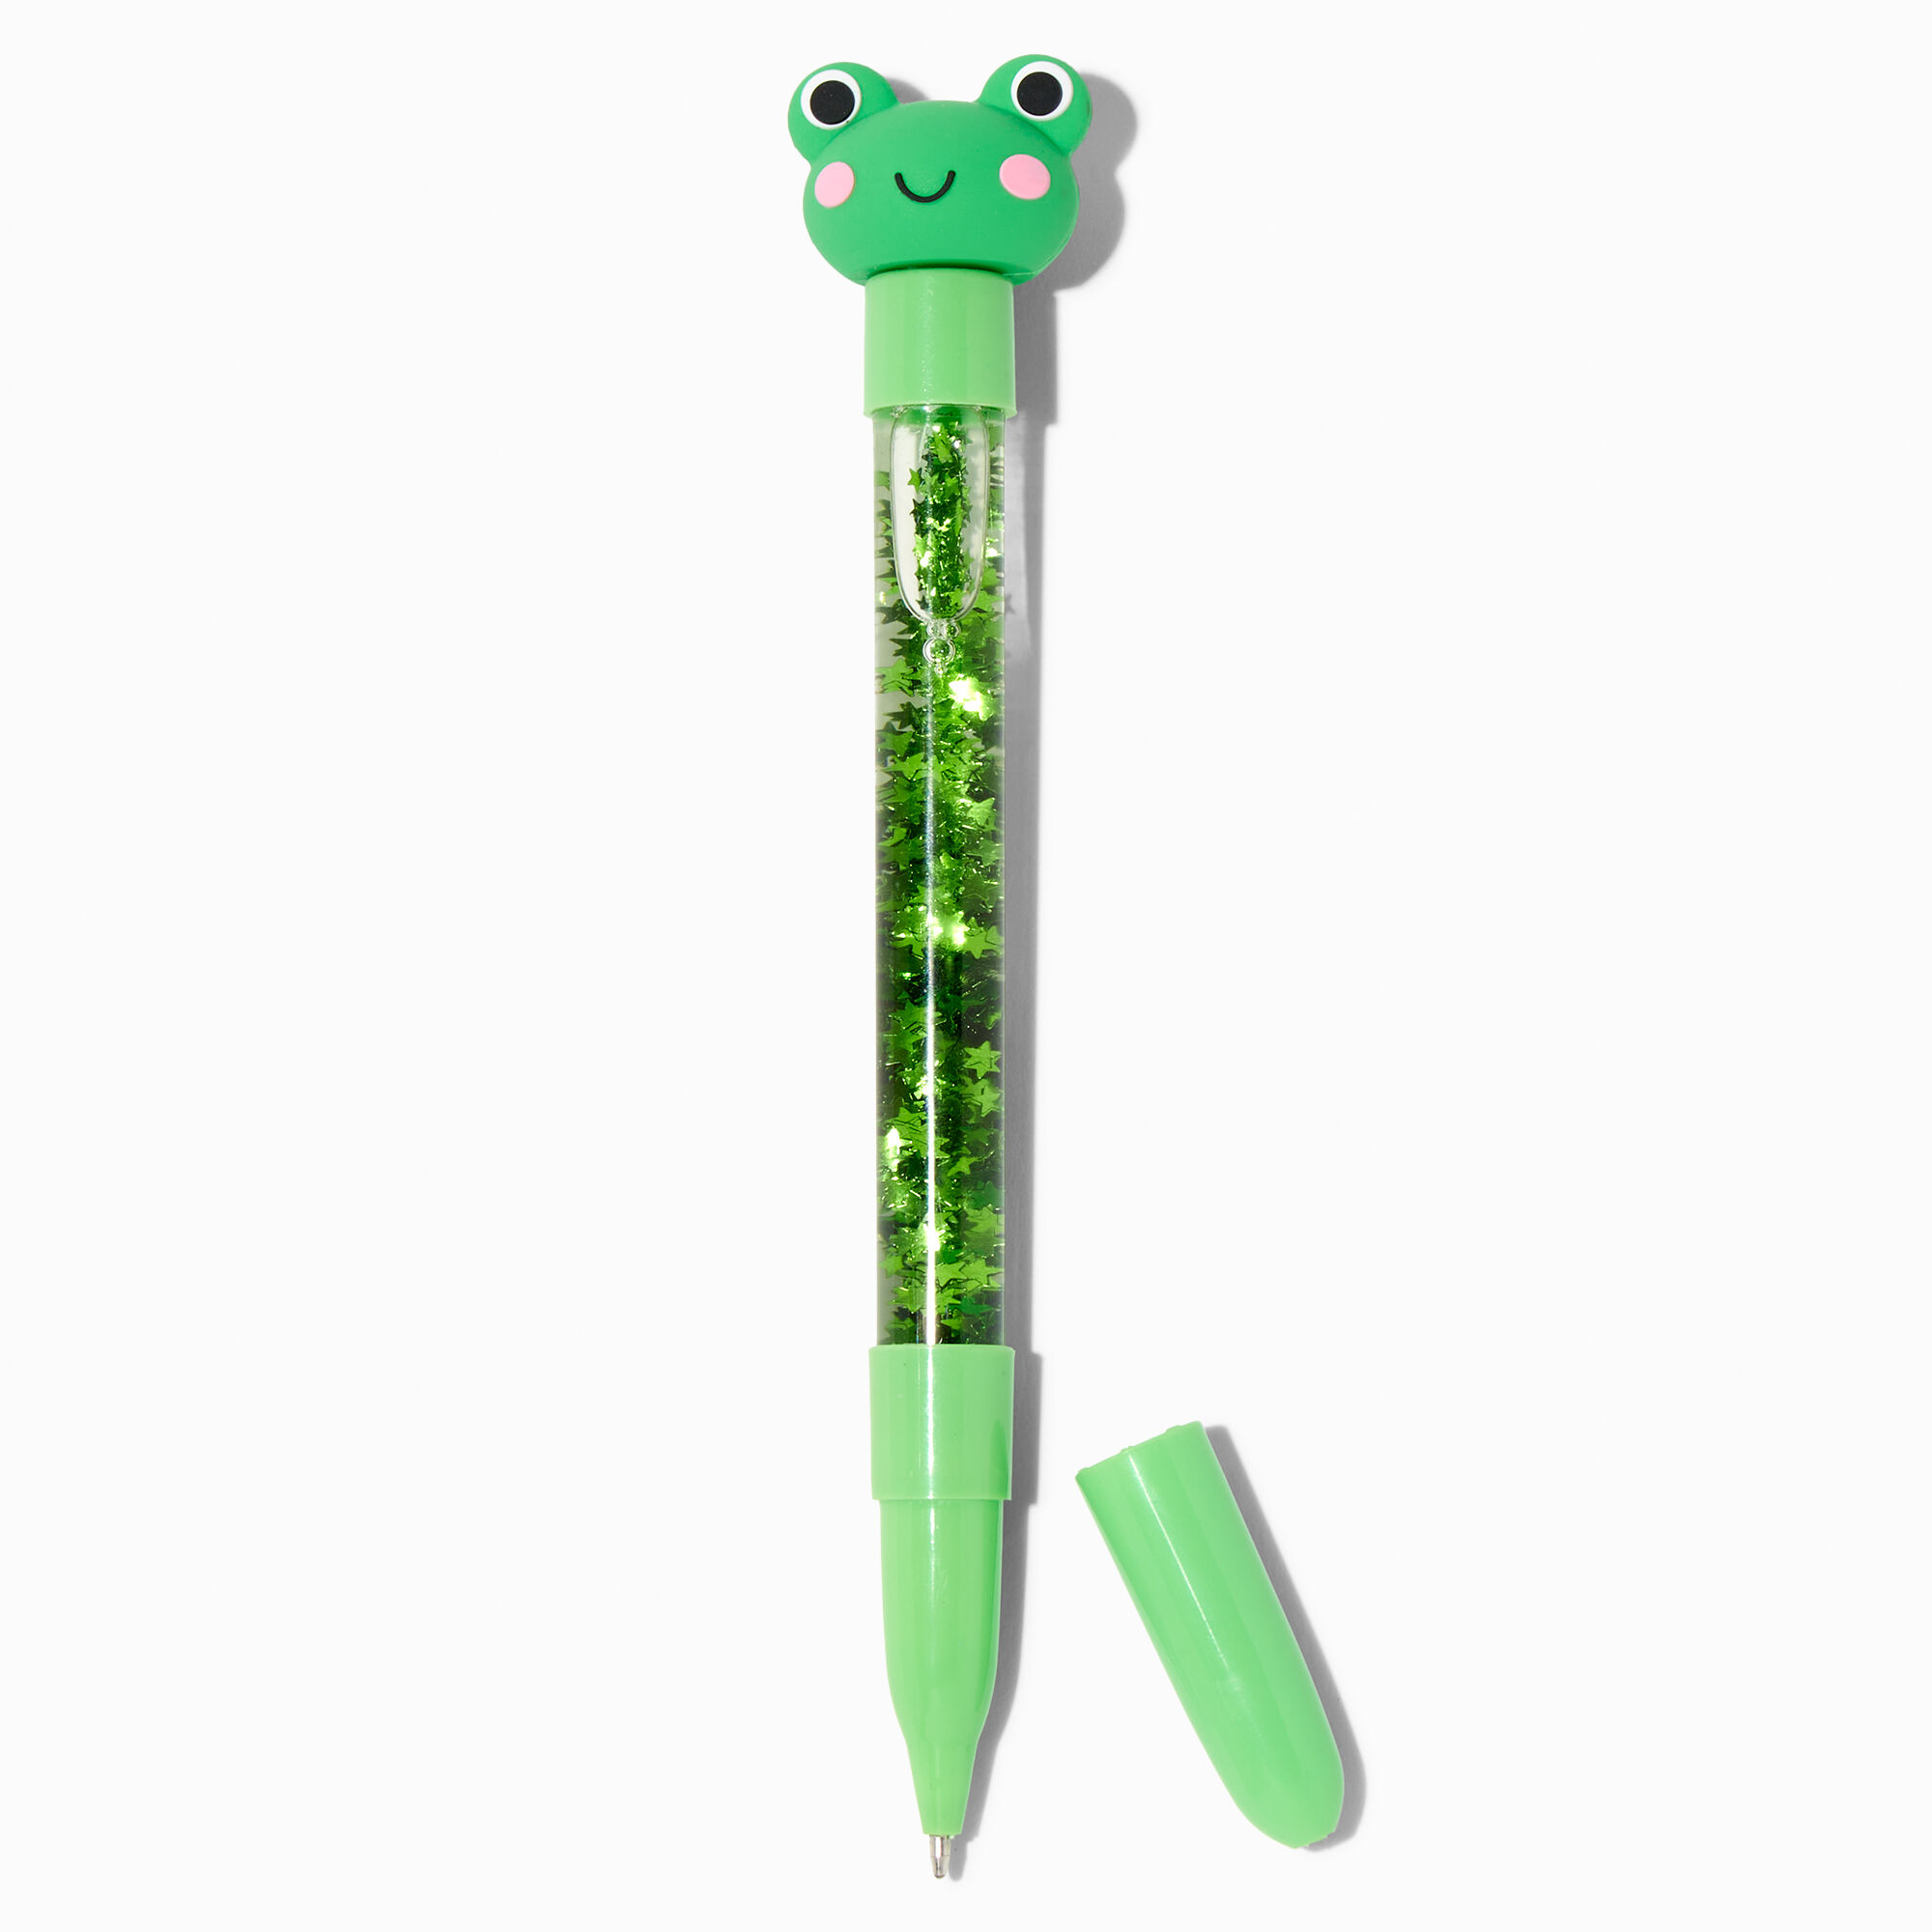 View Claires Frog WaterFilled Star Glitter Pen Green information